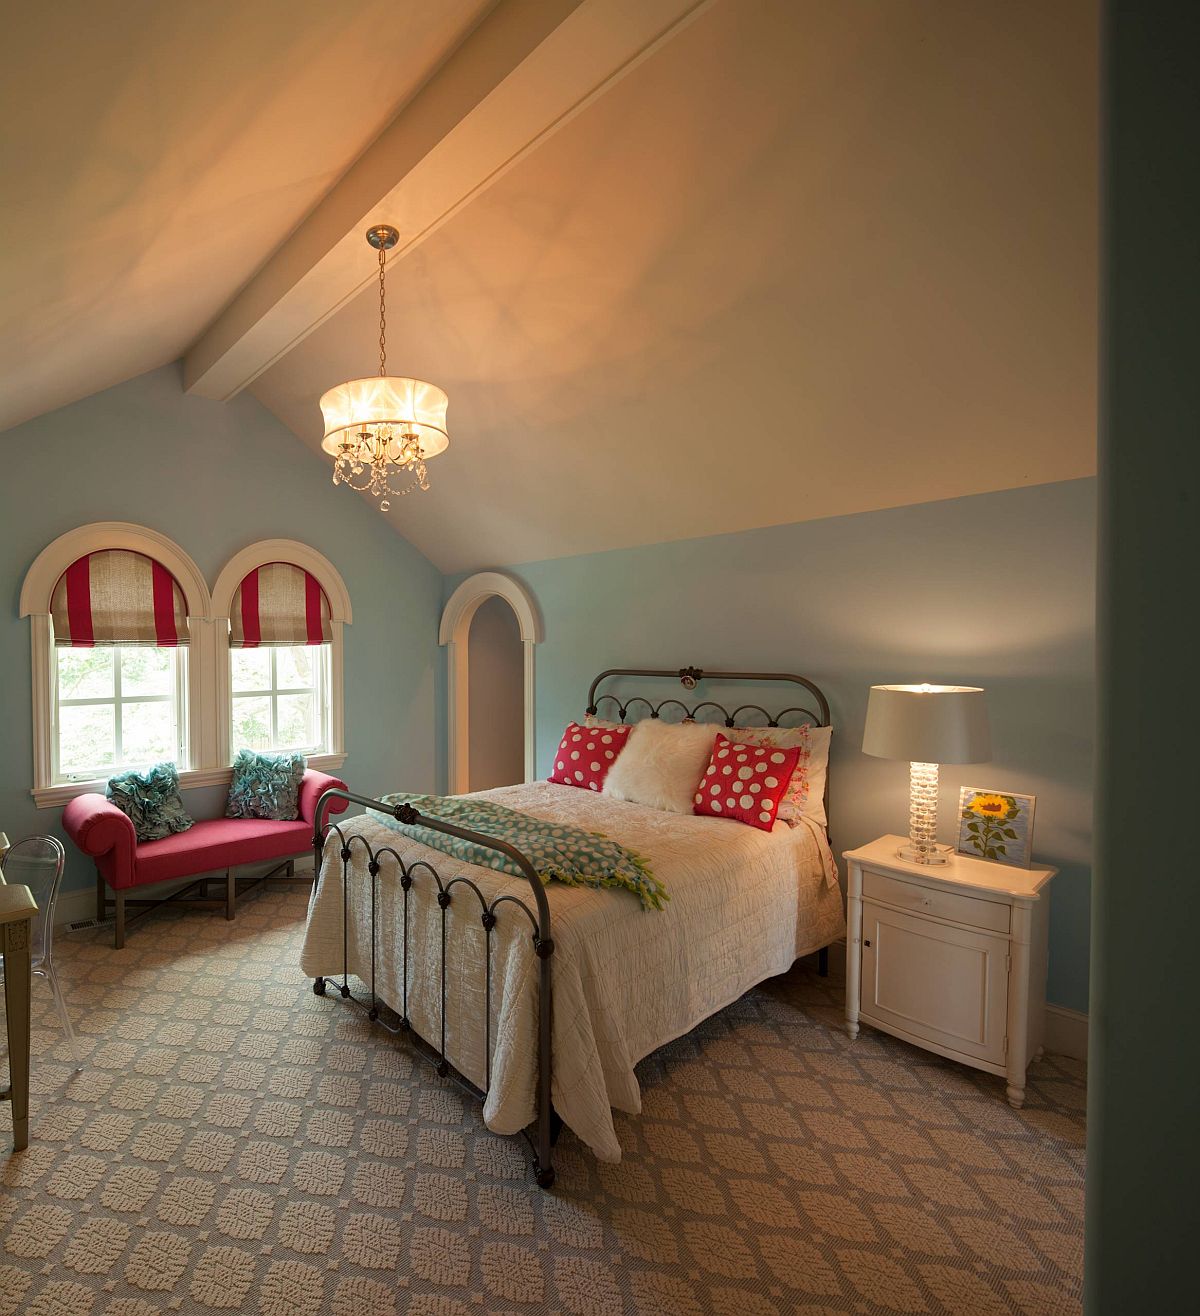 Traditional-attic-bedroom-wih-arched-windows-feels-cozy-and-classic-16095